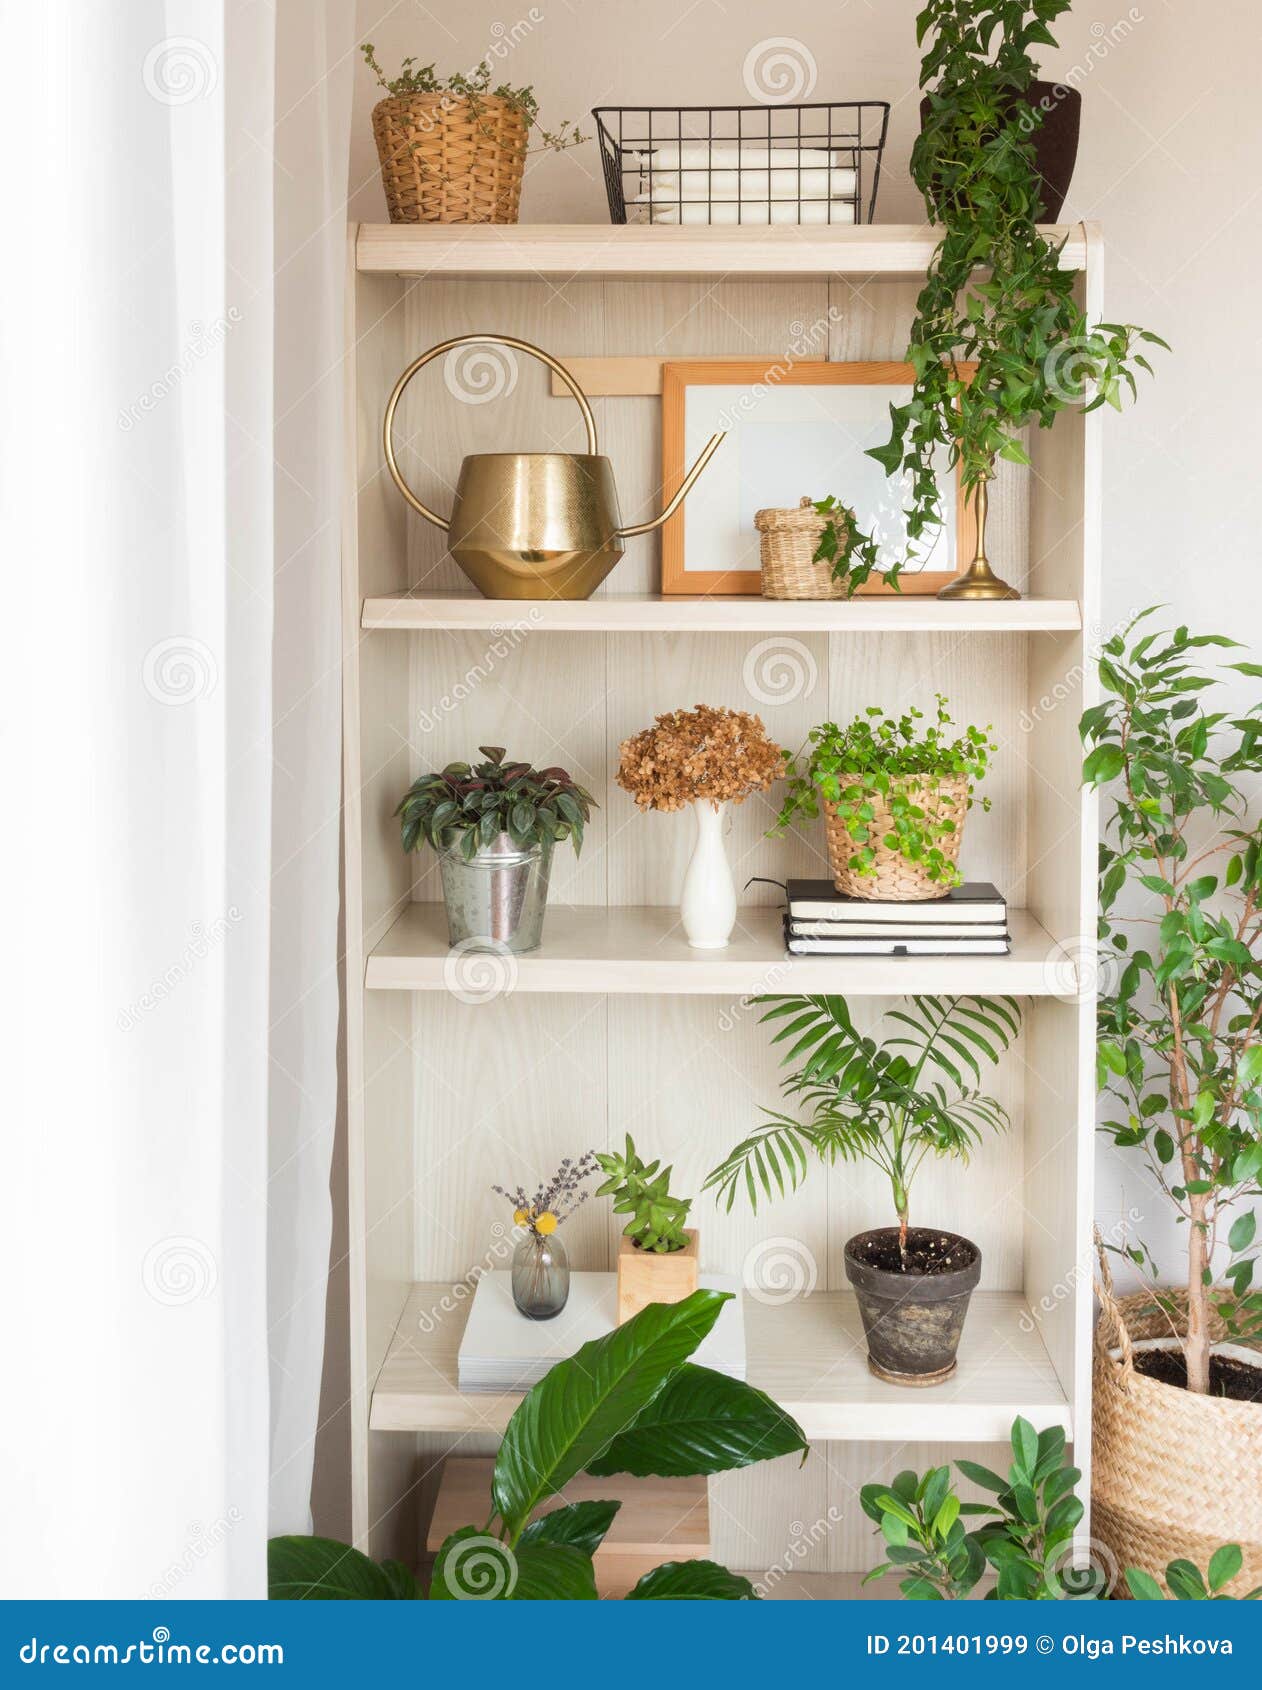 Houseplants and Home Decor on Wooden Shelves Stock Image - Image ...